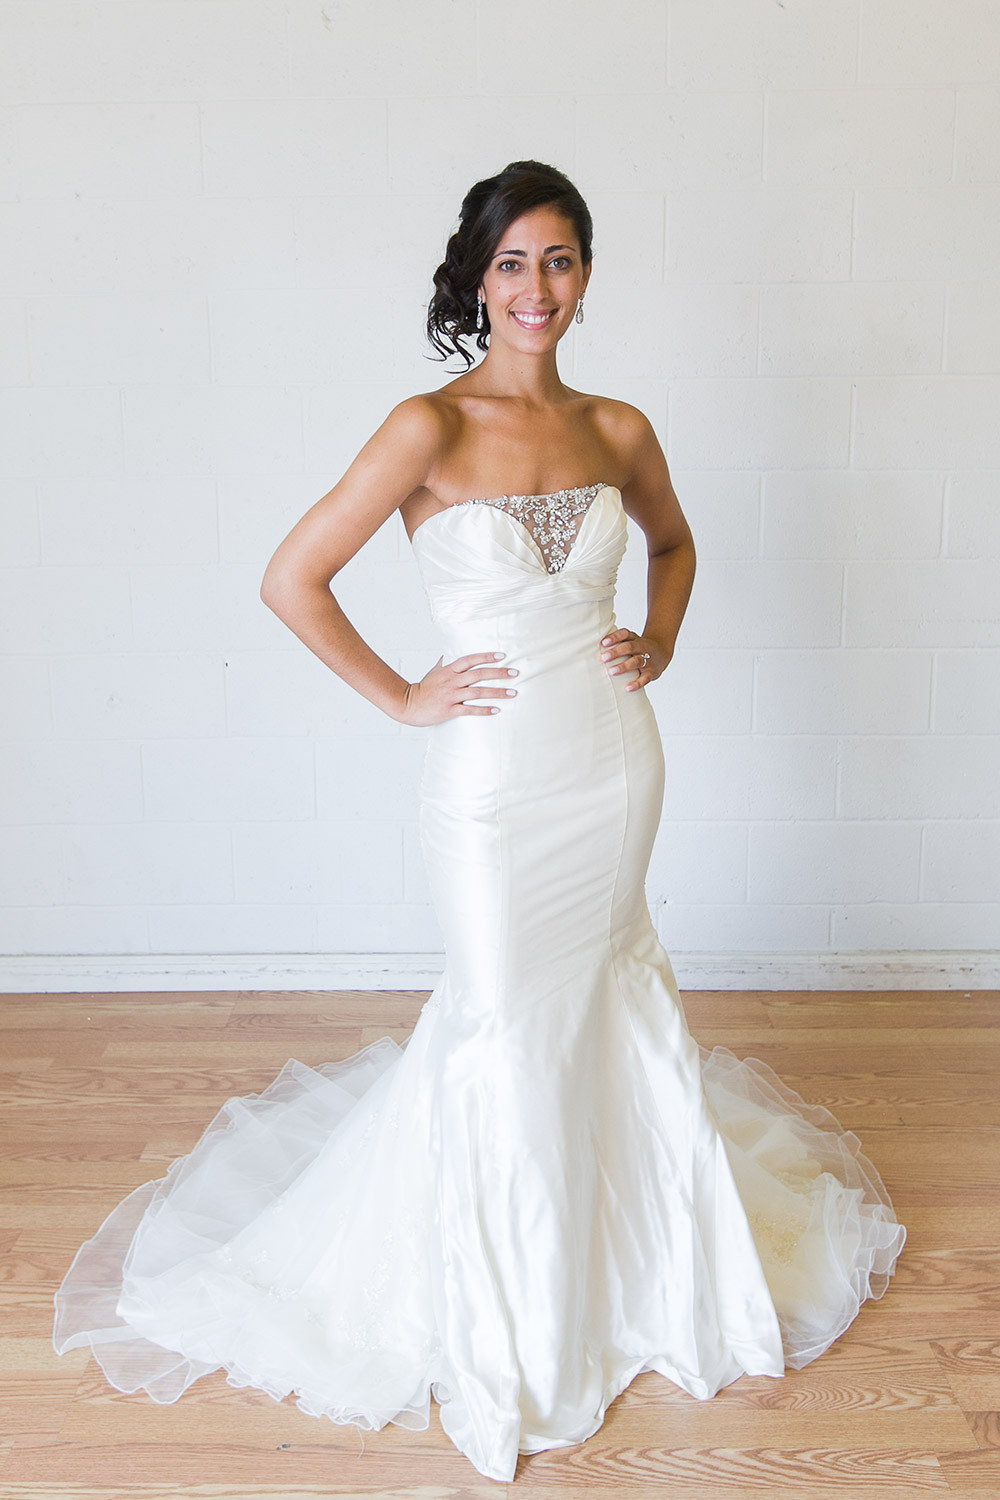 Wedding Dress Rental
 The Pros and Cons of a Wedding Dress Rental